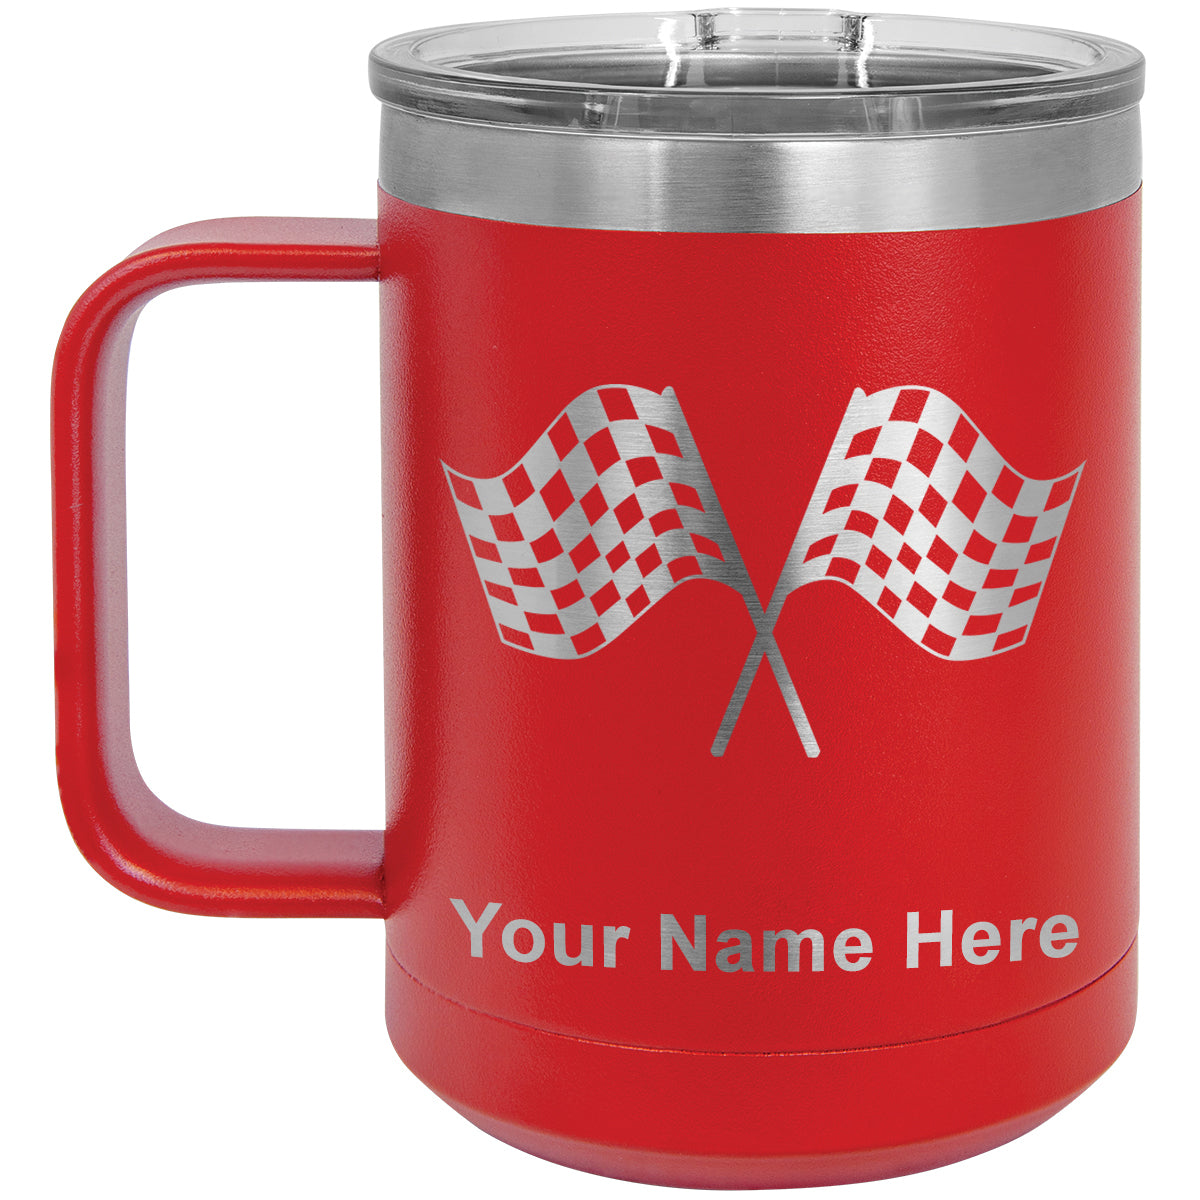 15oz Vacuum Insulated Coffee Mug, Racing Flags, Personalized Engraving Included